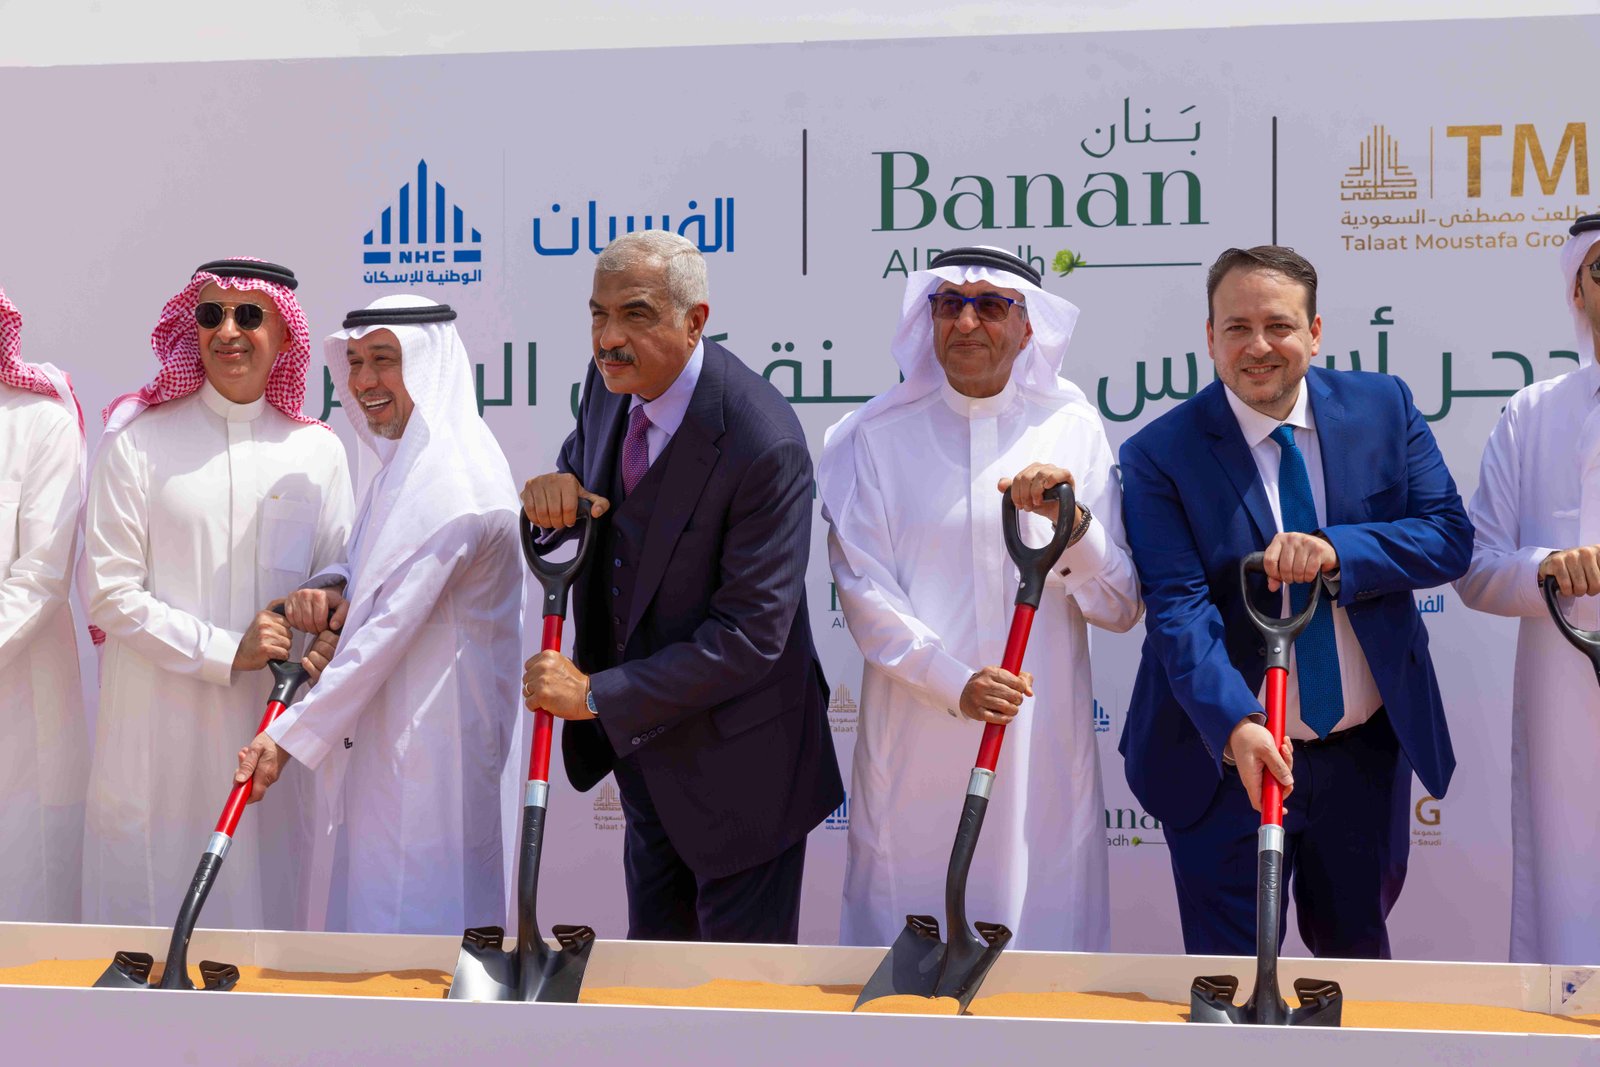 NHC and "Talaat Mostafa Group" Lay Foundation Stone for “Banan City” 